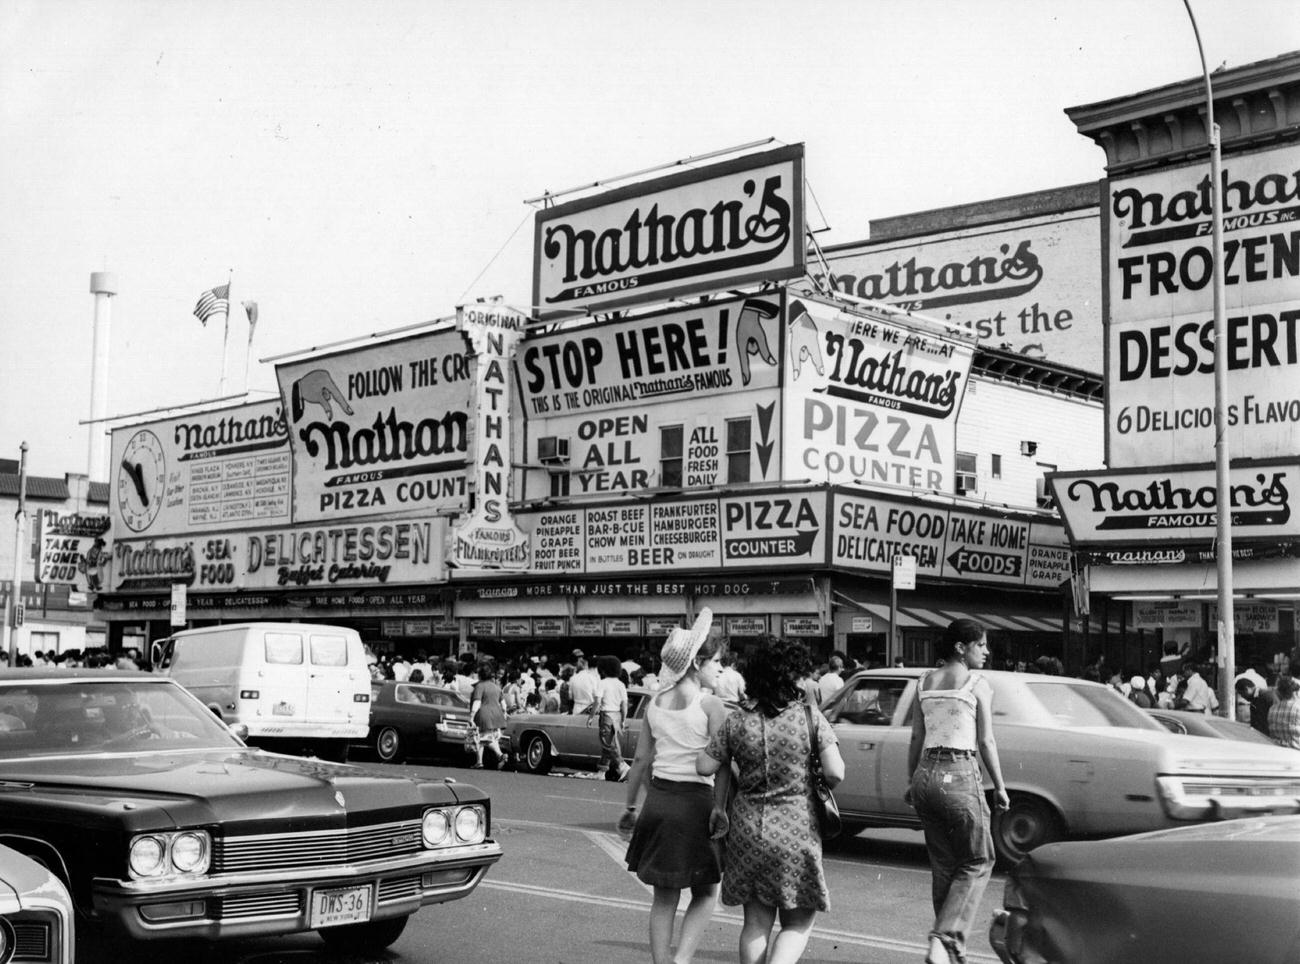 Nathan'S Famous Restaurant Recognized For Finest Hot Dogs, April 1976